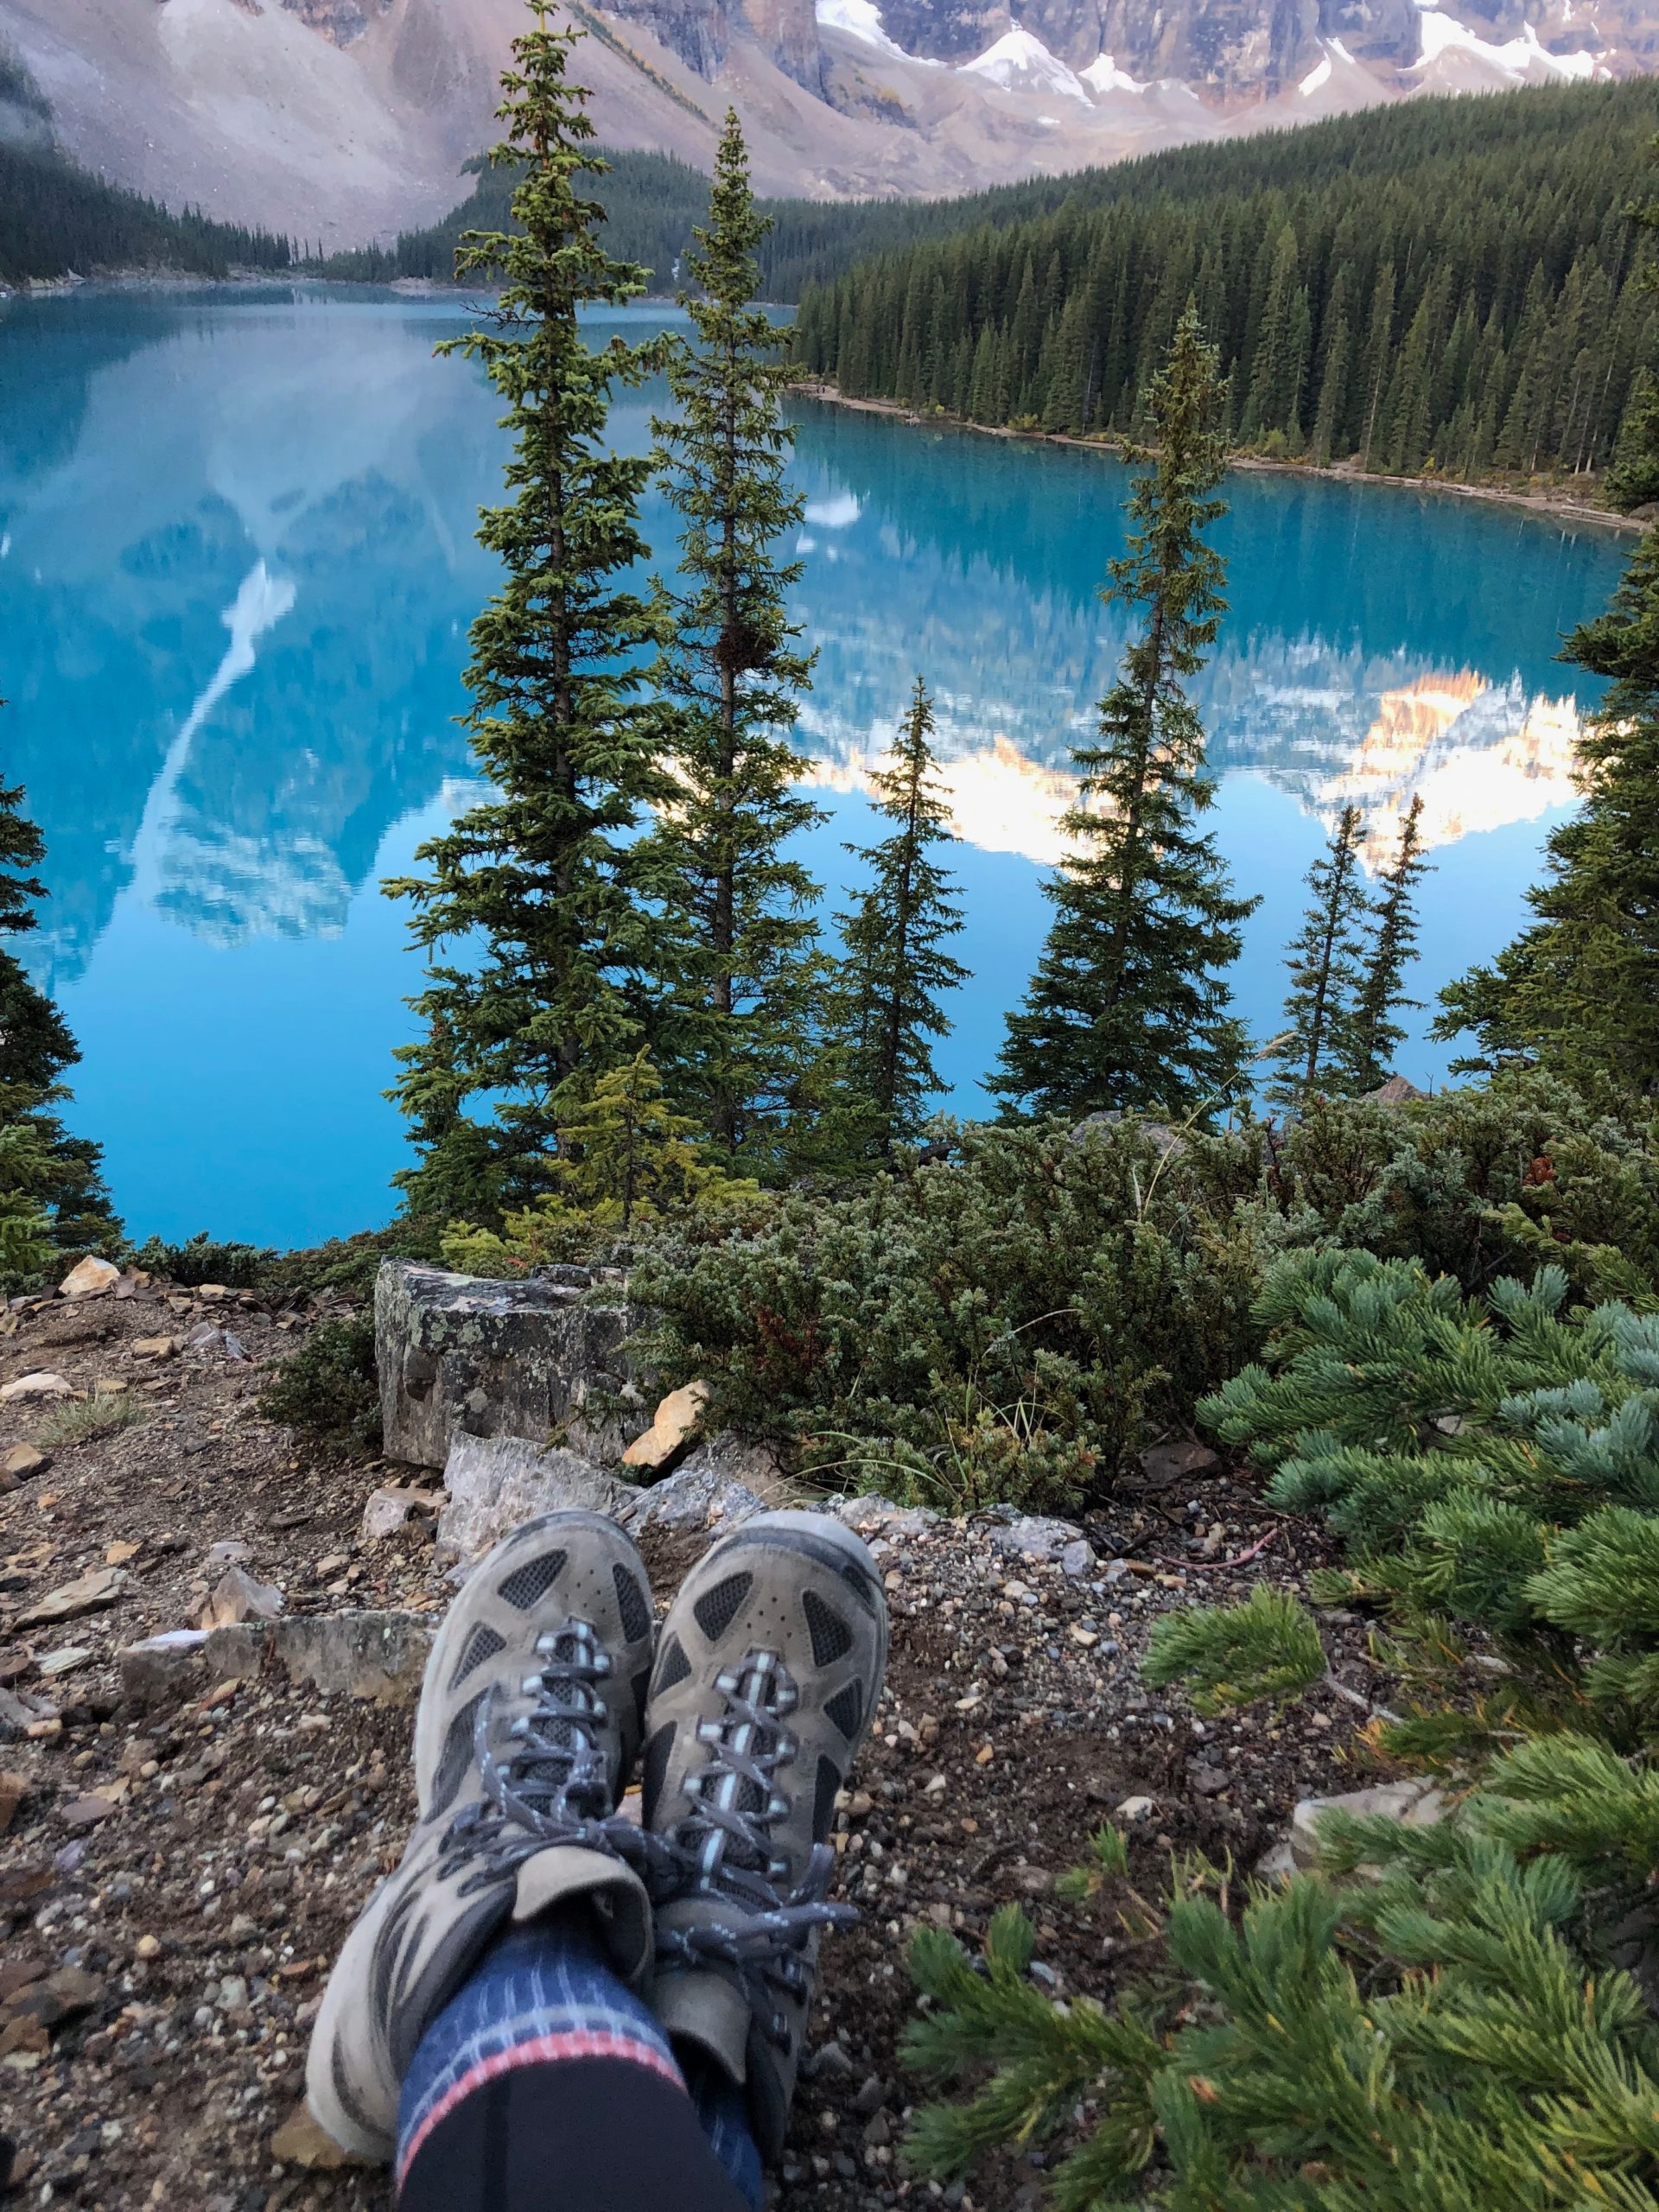 10 Tips to get in shape for a photographic trip to Banff